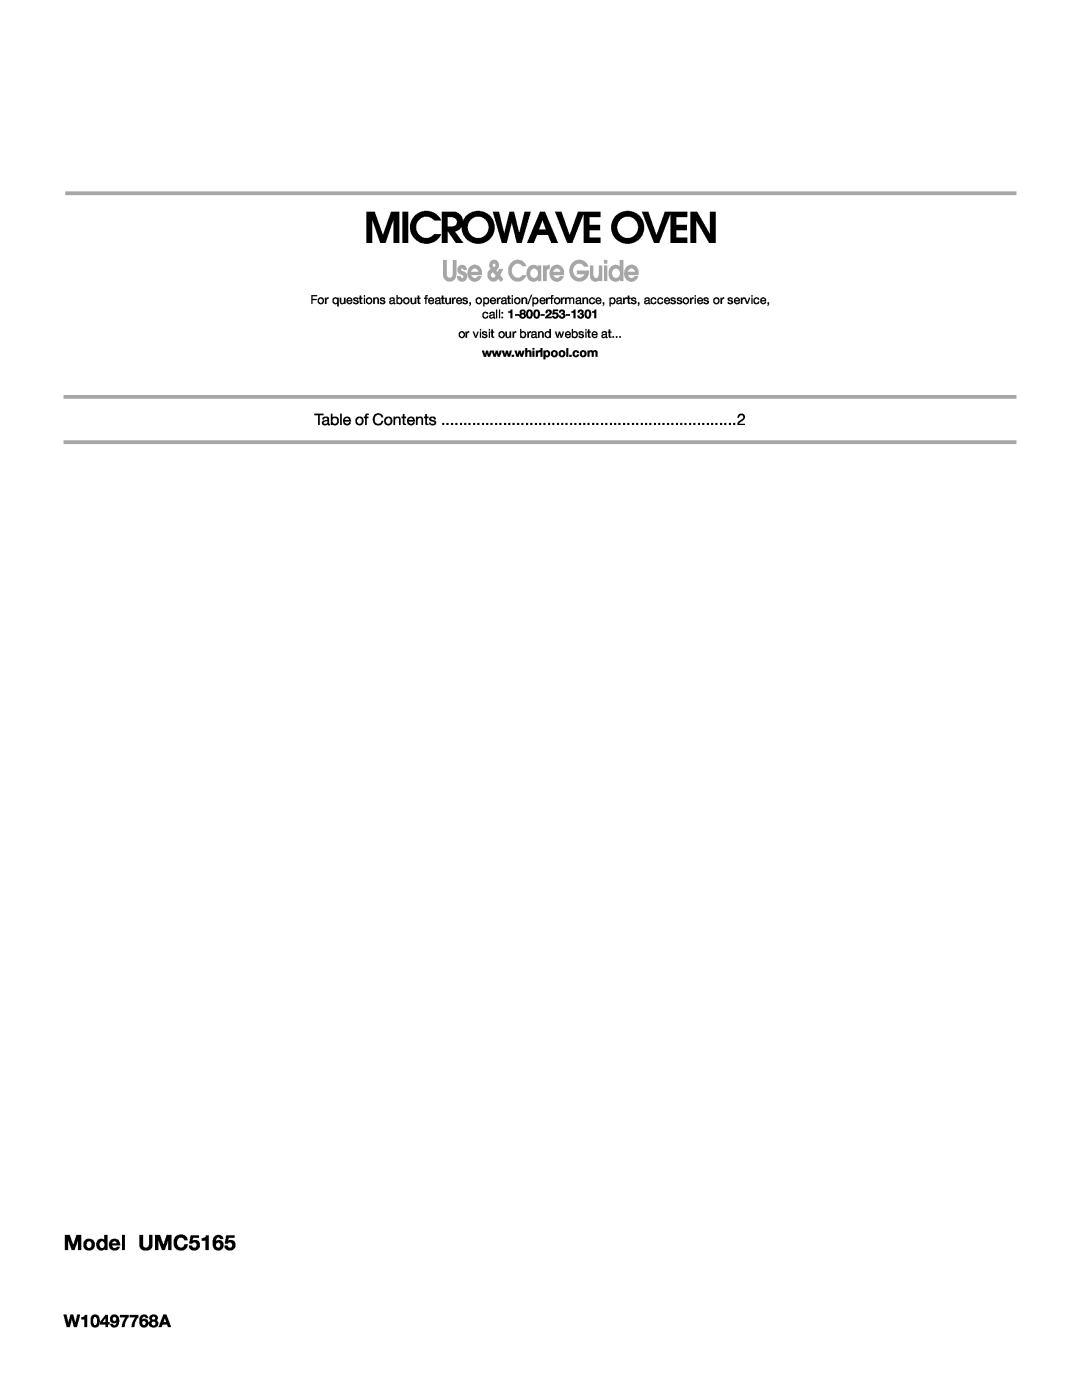 Whirlpool manual Microwave Oven, Use & Care Guide, Model UMC5165, call, or visit our brand website at 